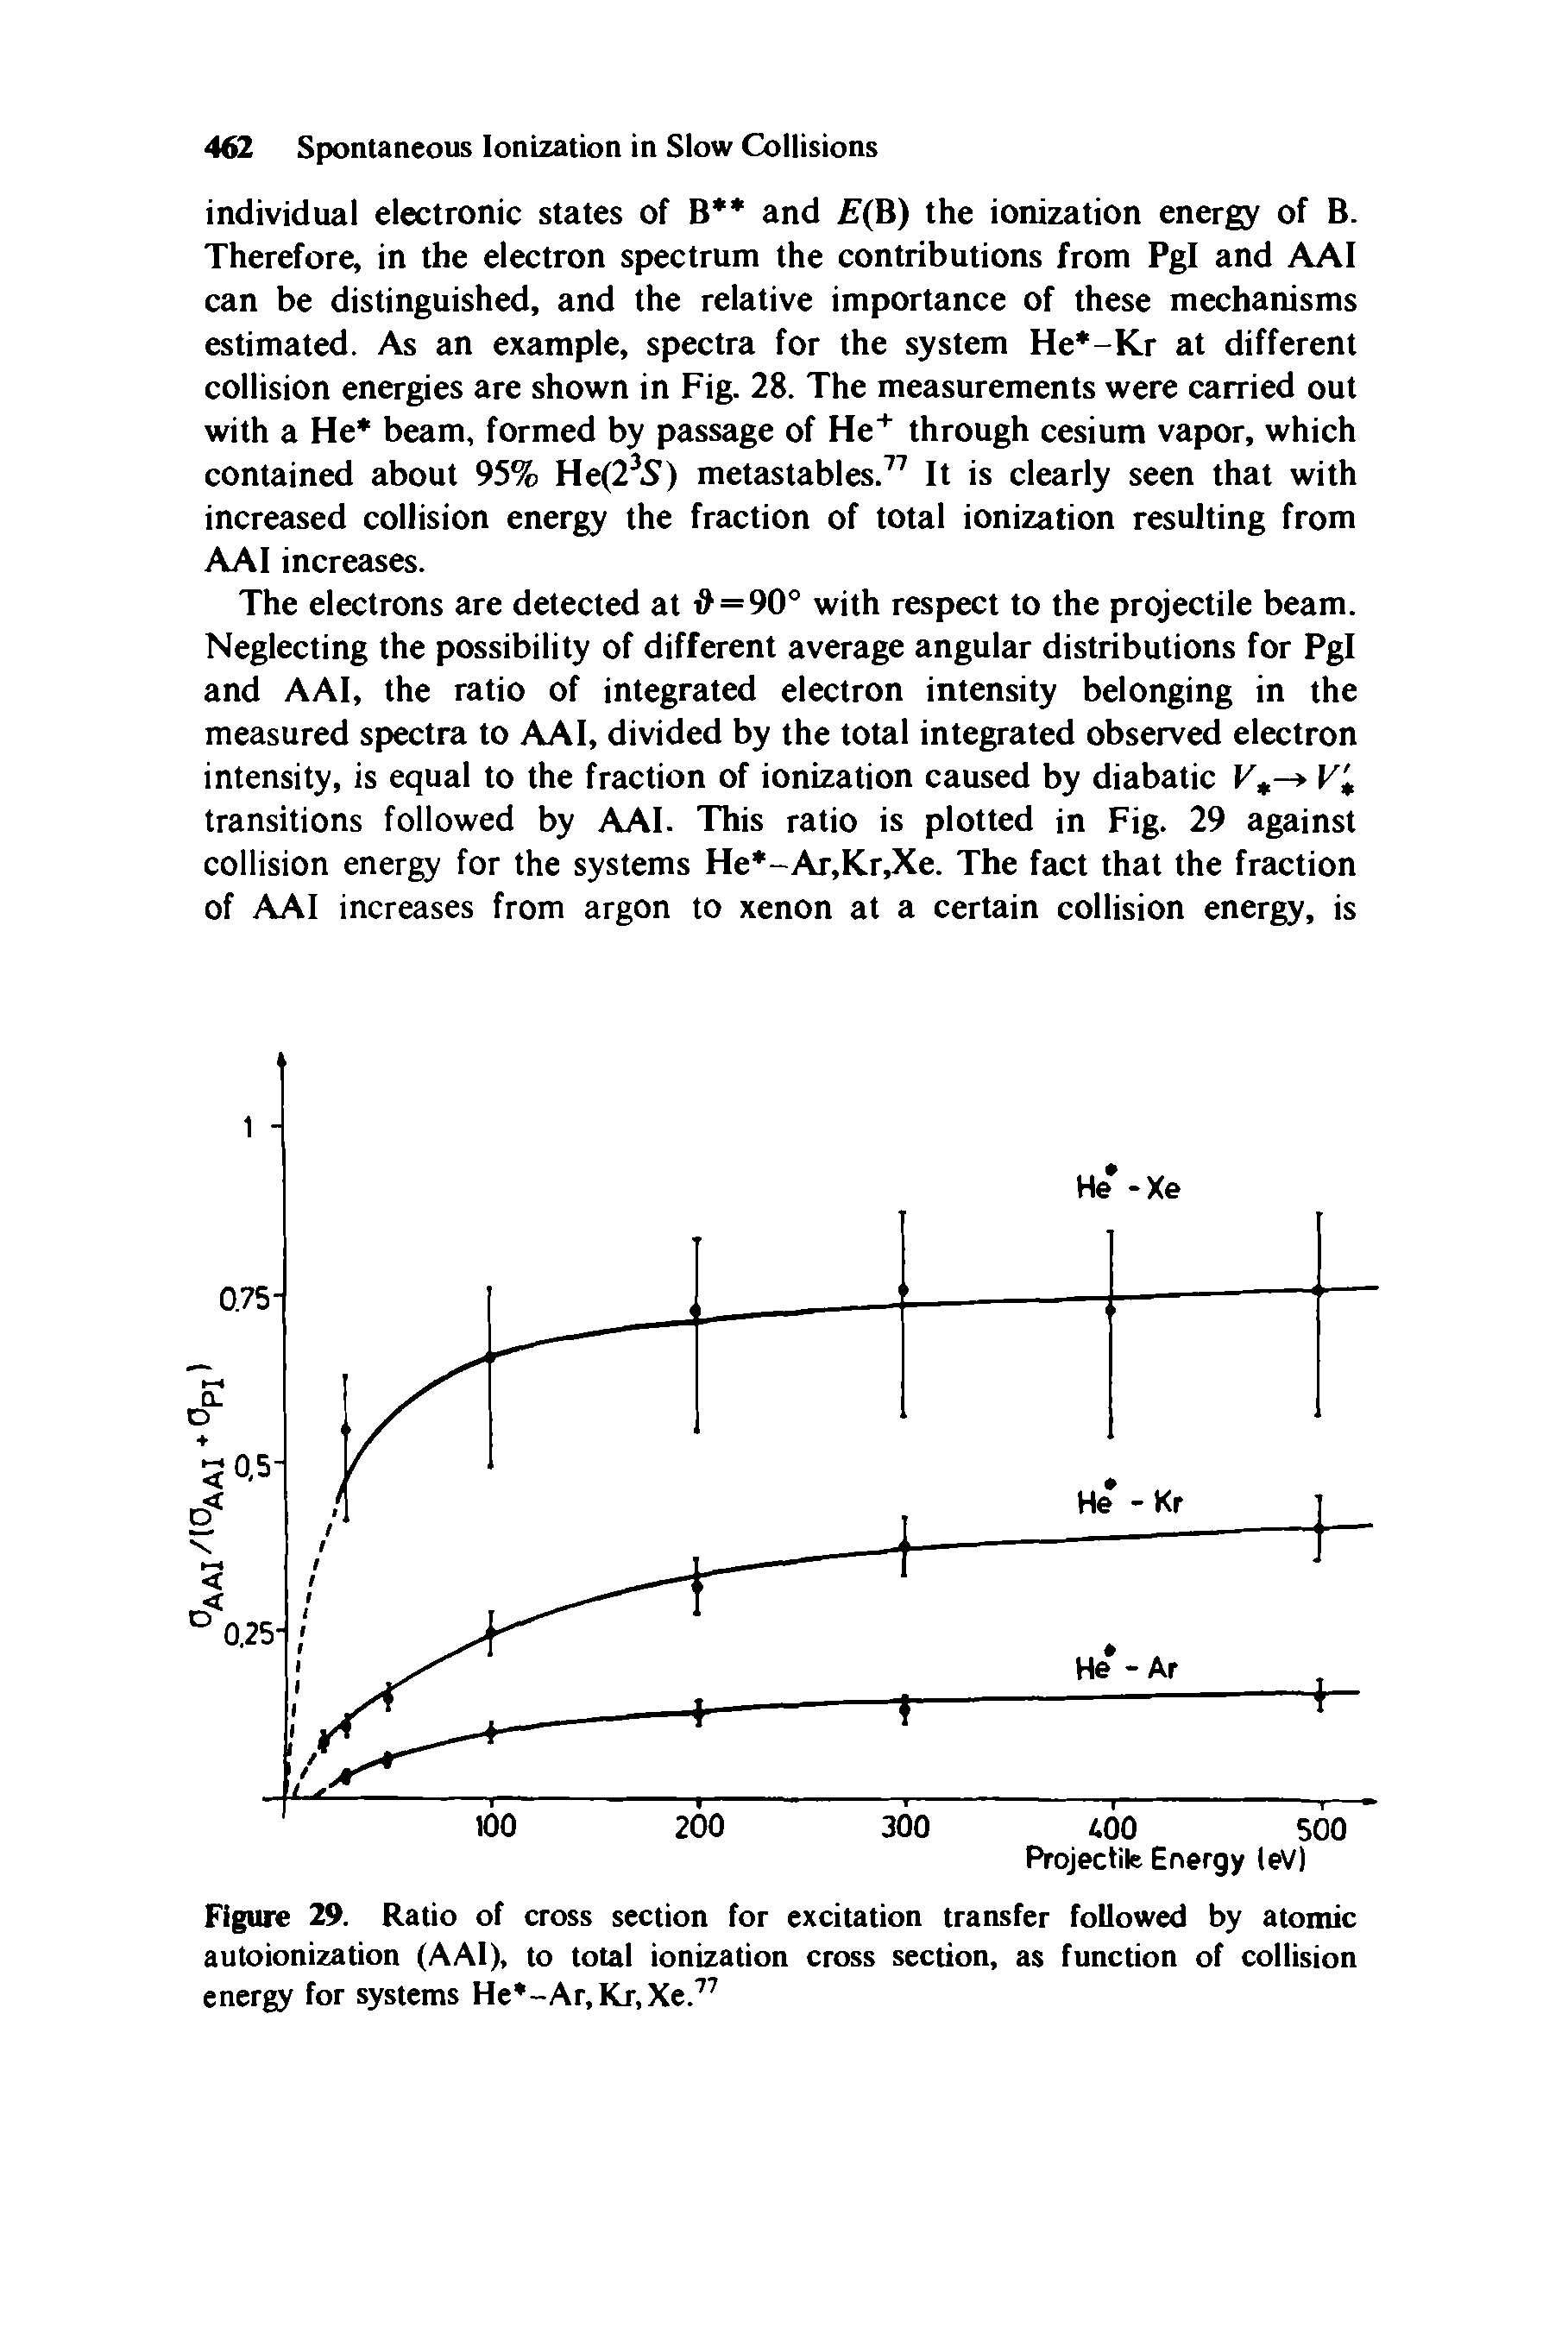 Figure 29. Ratio of cross section for excitation transfer followed by atomic autoionization (AAI), to total ionization cross section, as function of collision energy for systems He -Ar,Kr,Xe.77...